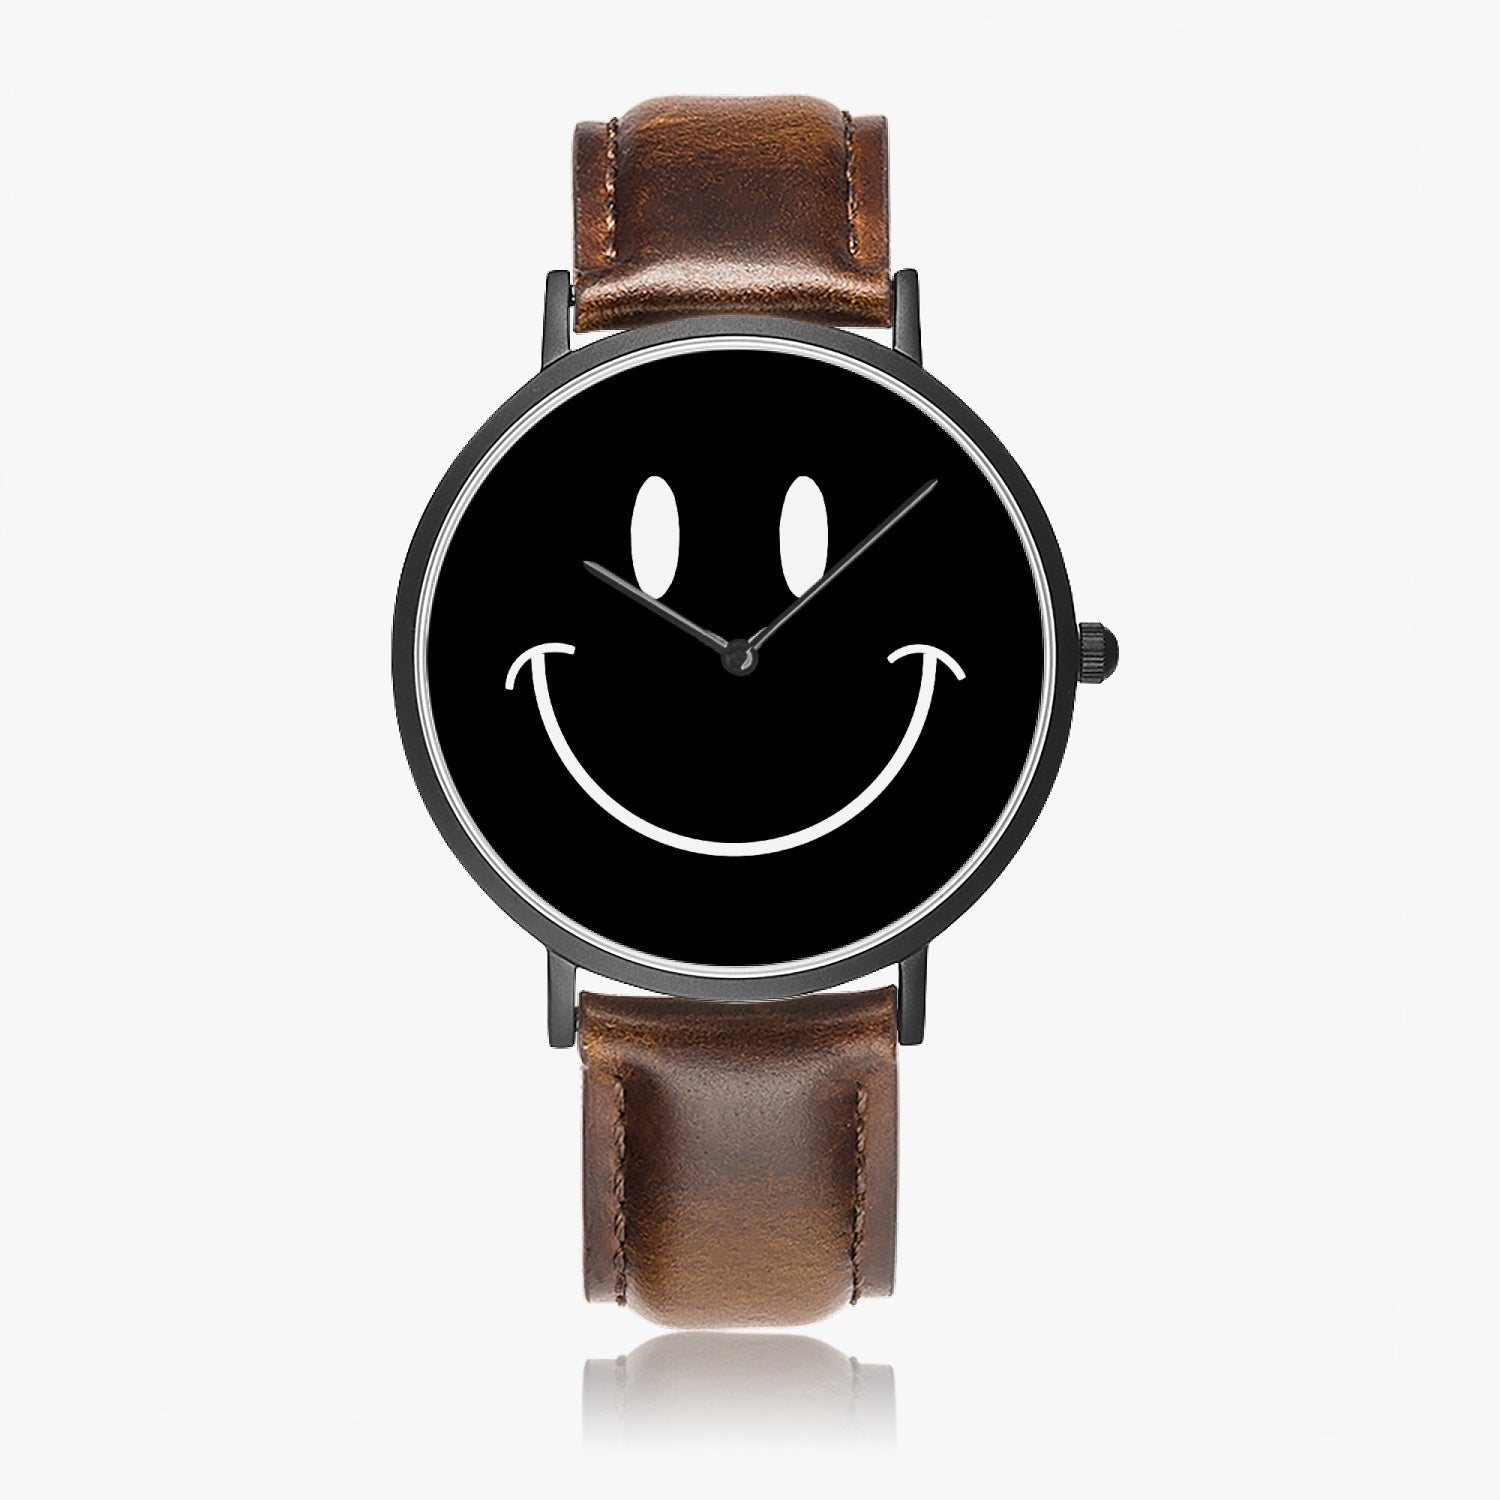 Be Happy Black Smiley Face Ultra-Thin Leather Strap Quartz Watch - The Kindness Cause Father's Day Gift Ideas That Give Back